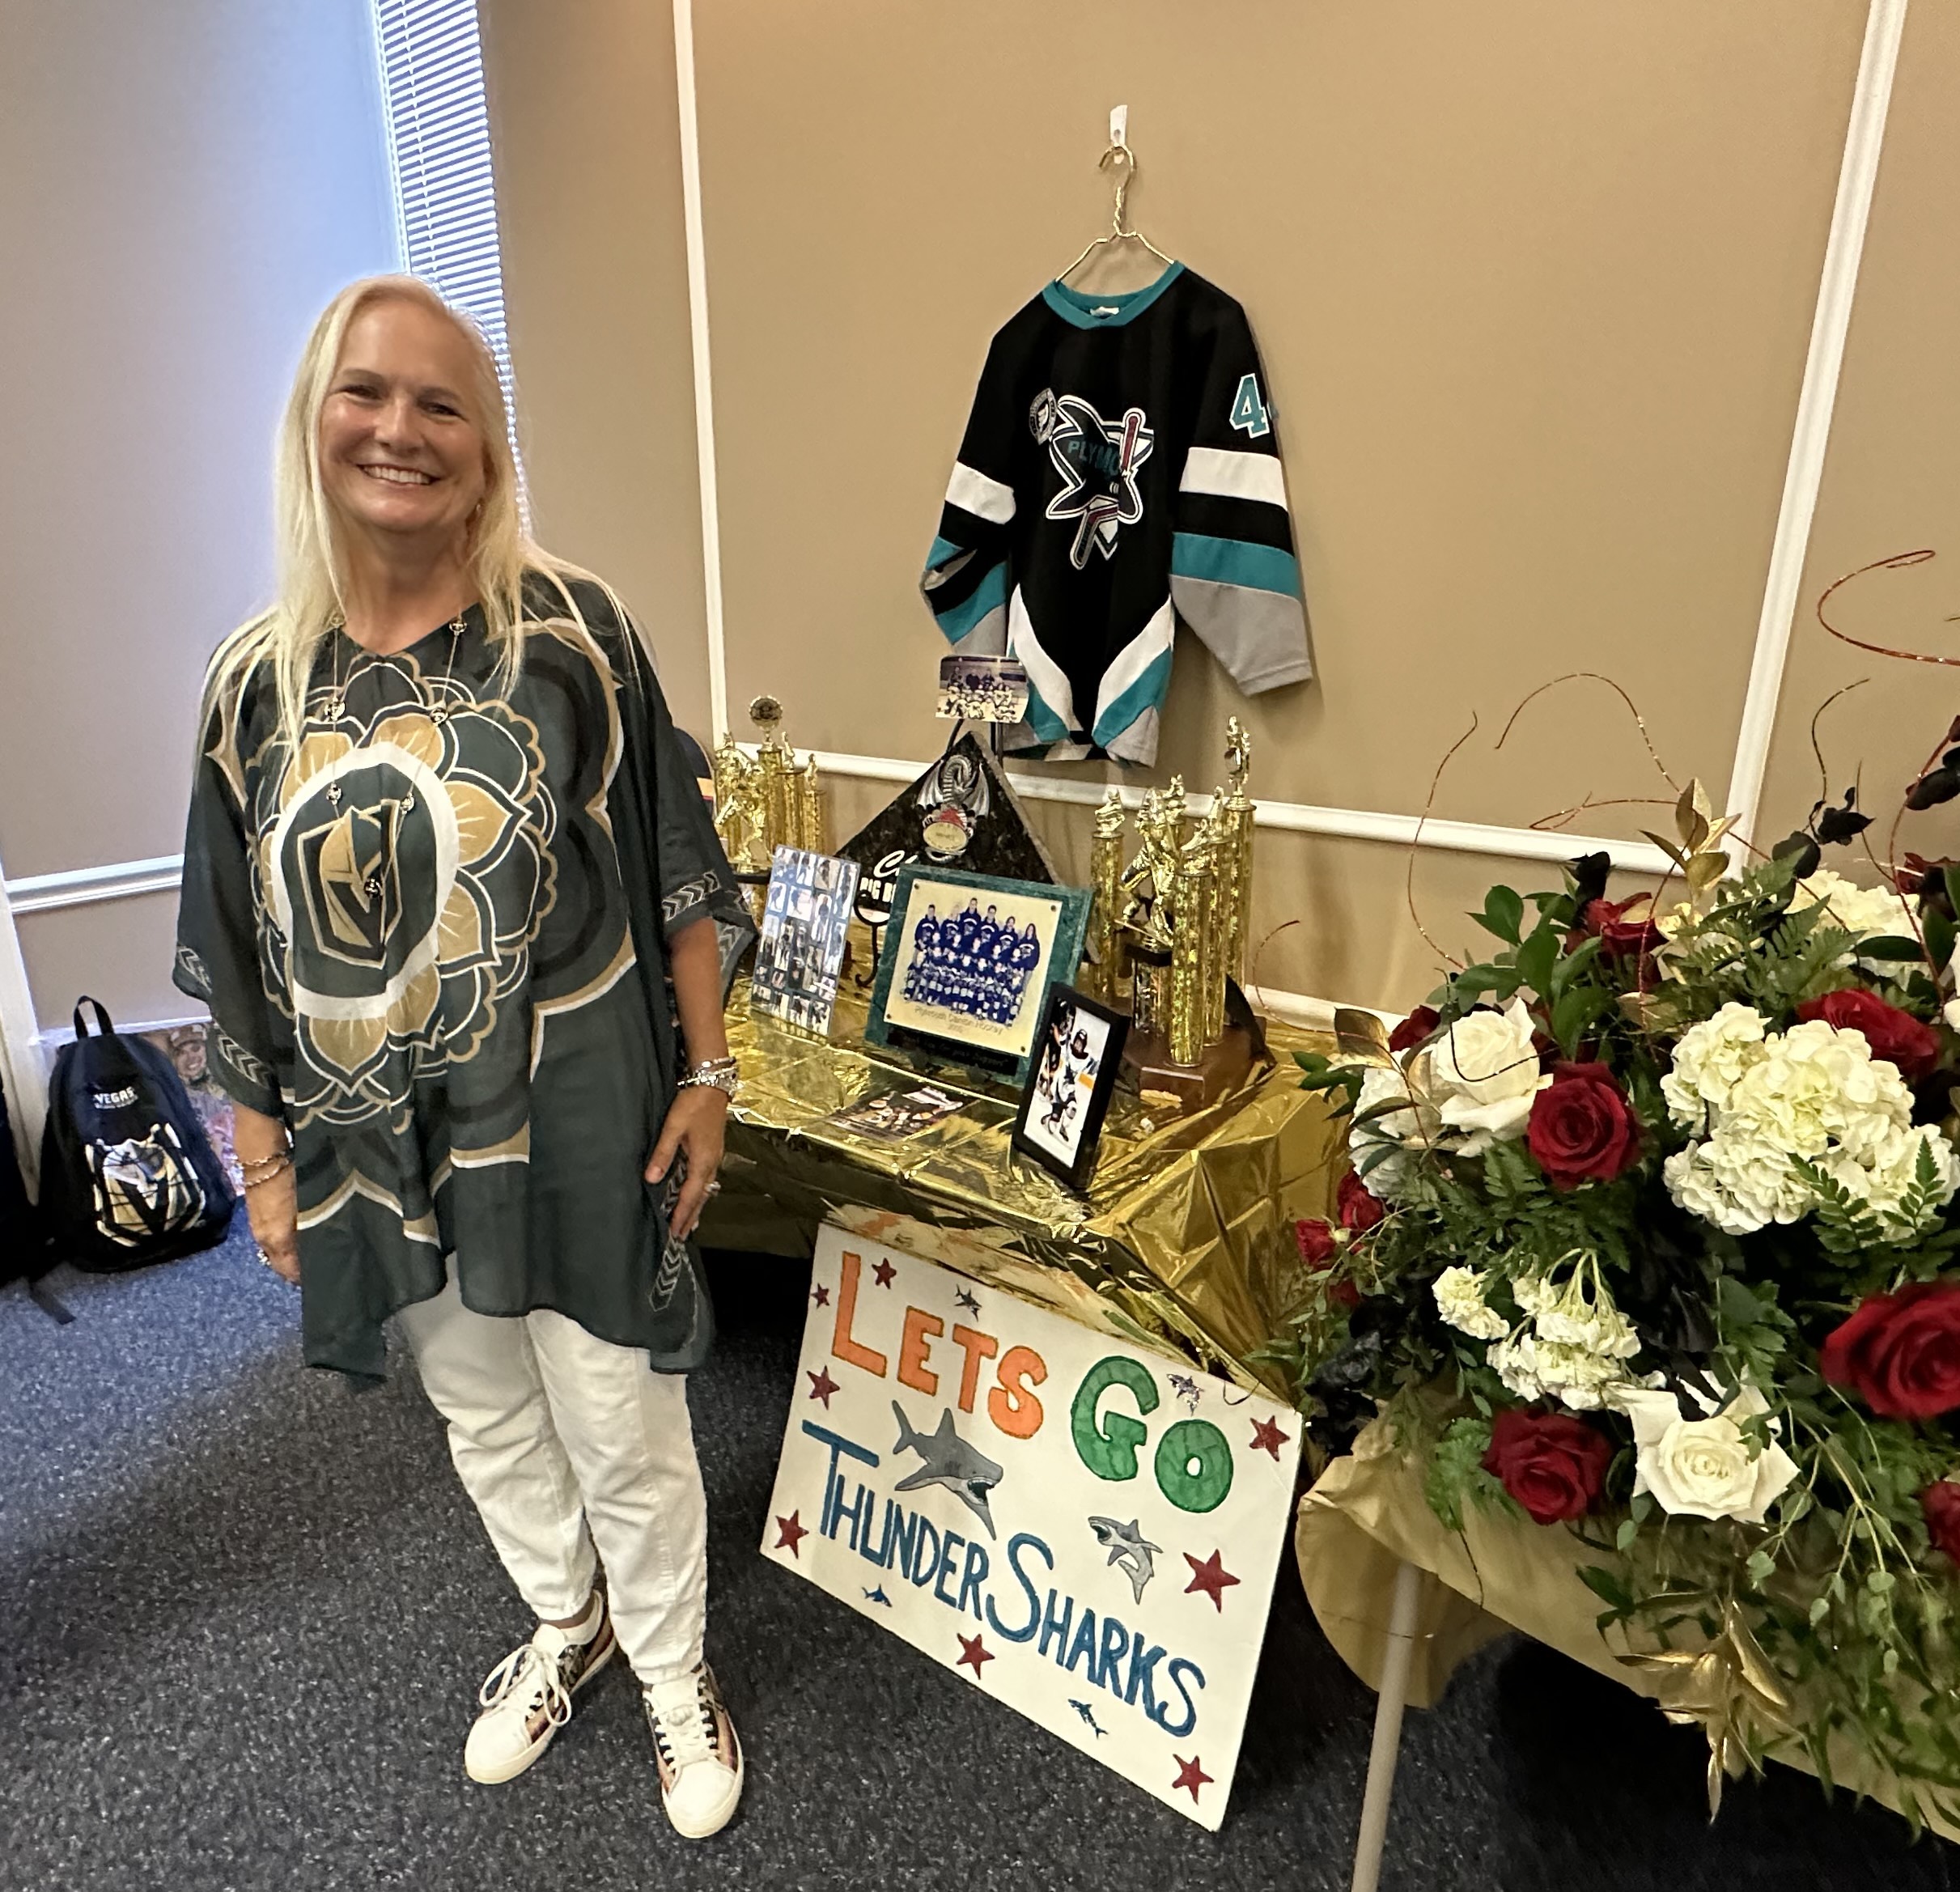 Lisa Cotter poses with some of her son's youth hockey memorabilia